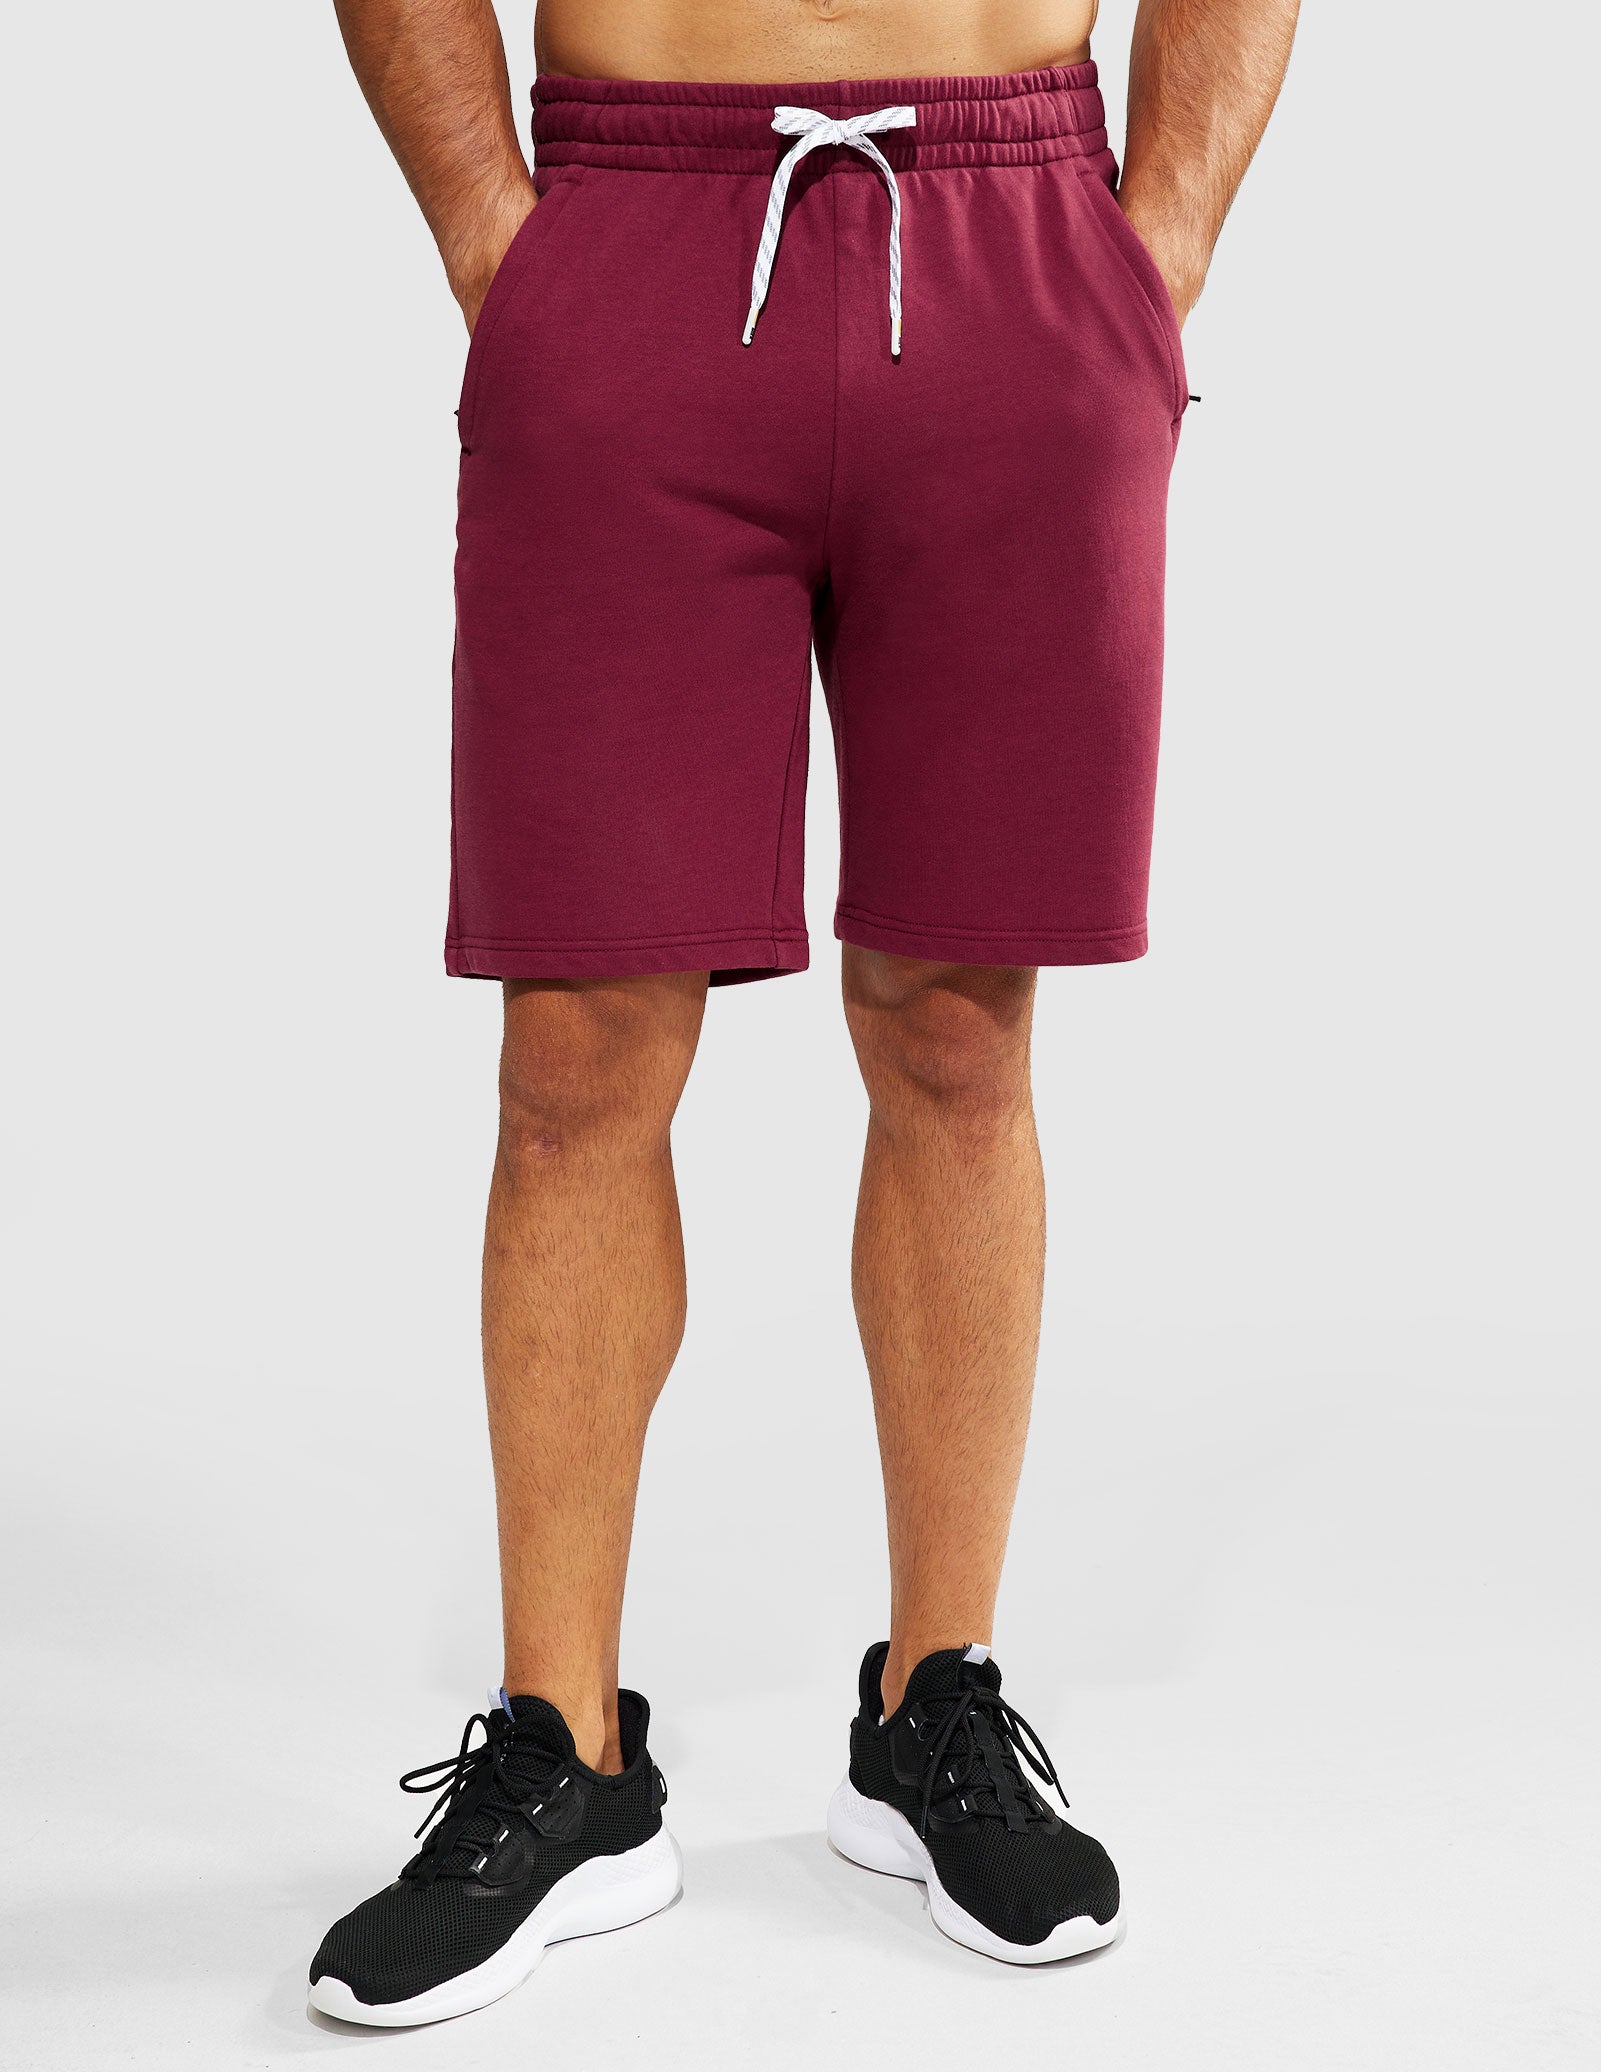 Men's 9-Inch Athletic Cotton Shorts with Pockets